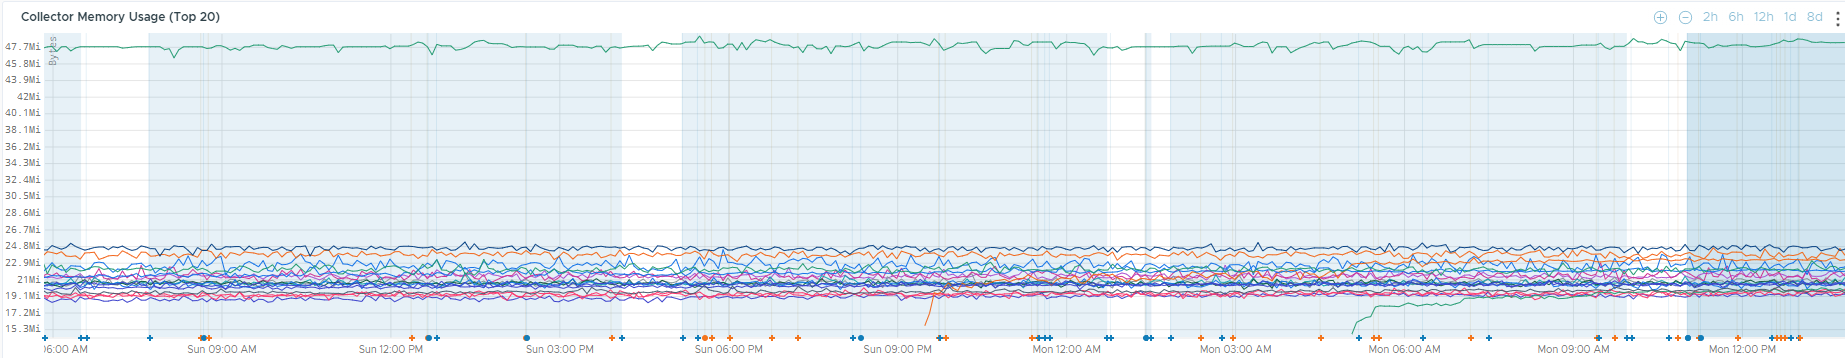 Collector Memory Usage Graph on the Collector Troubleshooting Dashboard